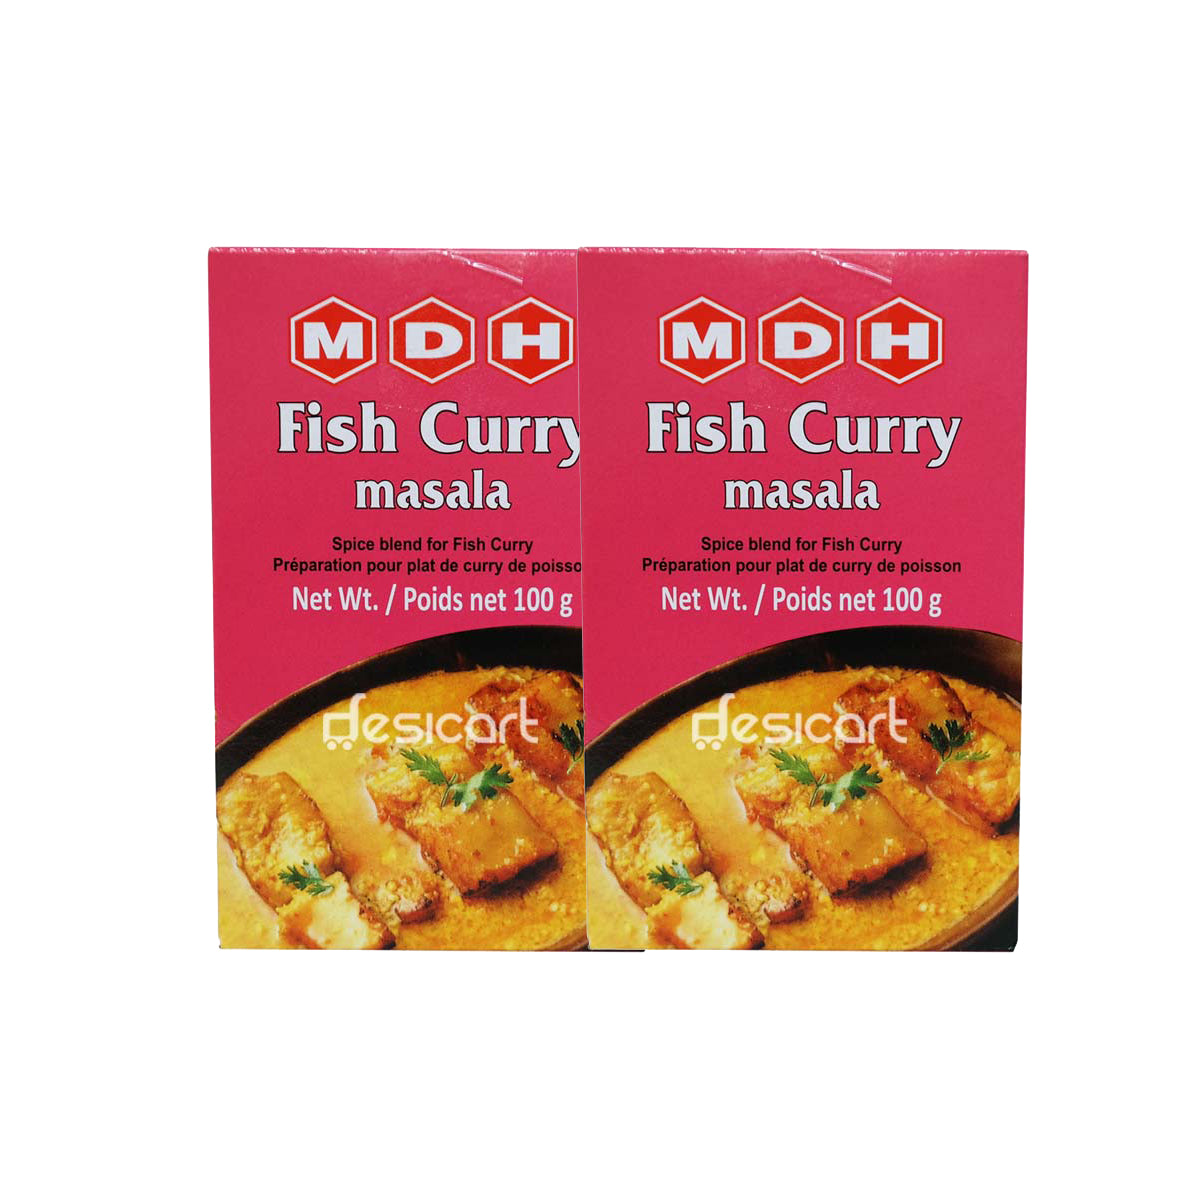 MDH FISH CURRY MASALA (PACK OF 2) 100g